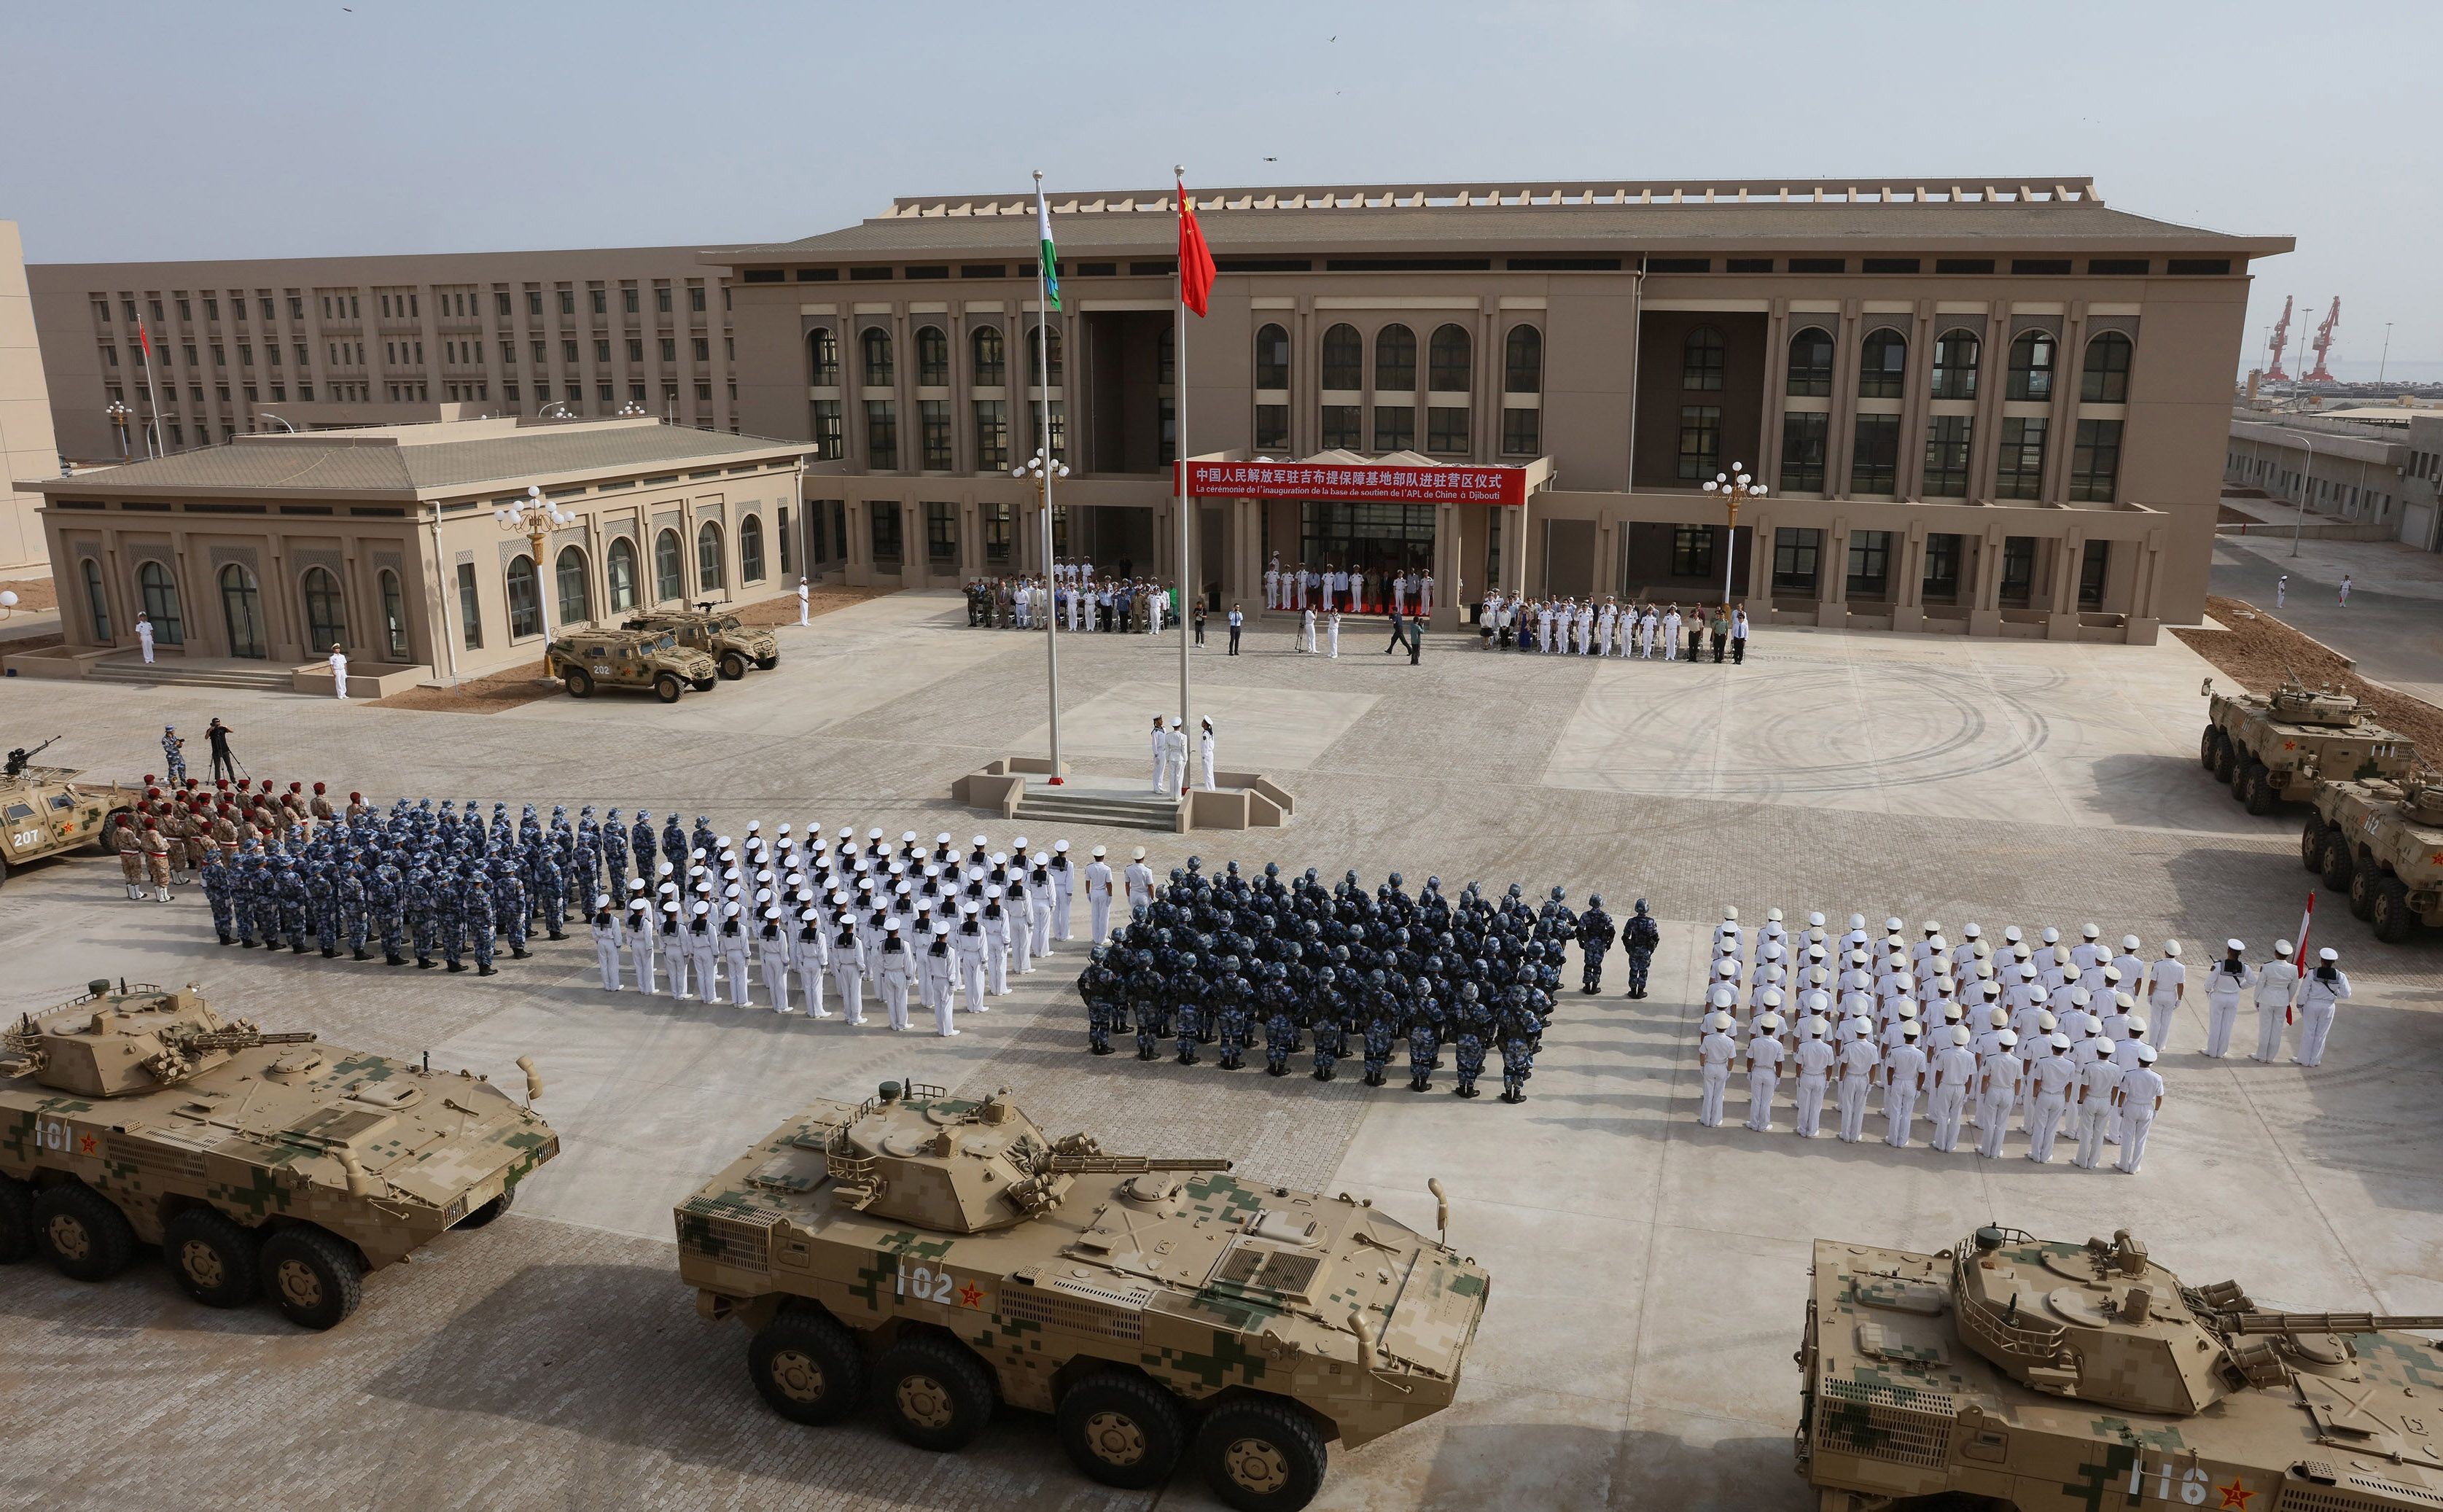 People's Liberation Army personnel attend the opening ceremony of China’s new military base in Djibouti on August 1. Photo: AFP